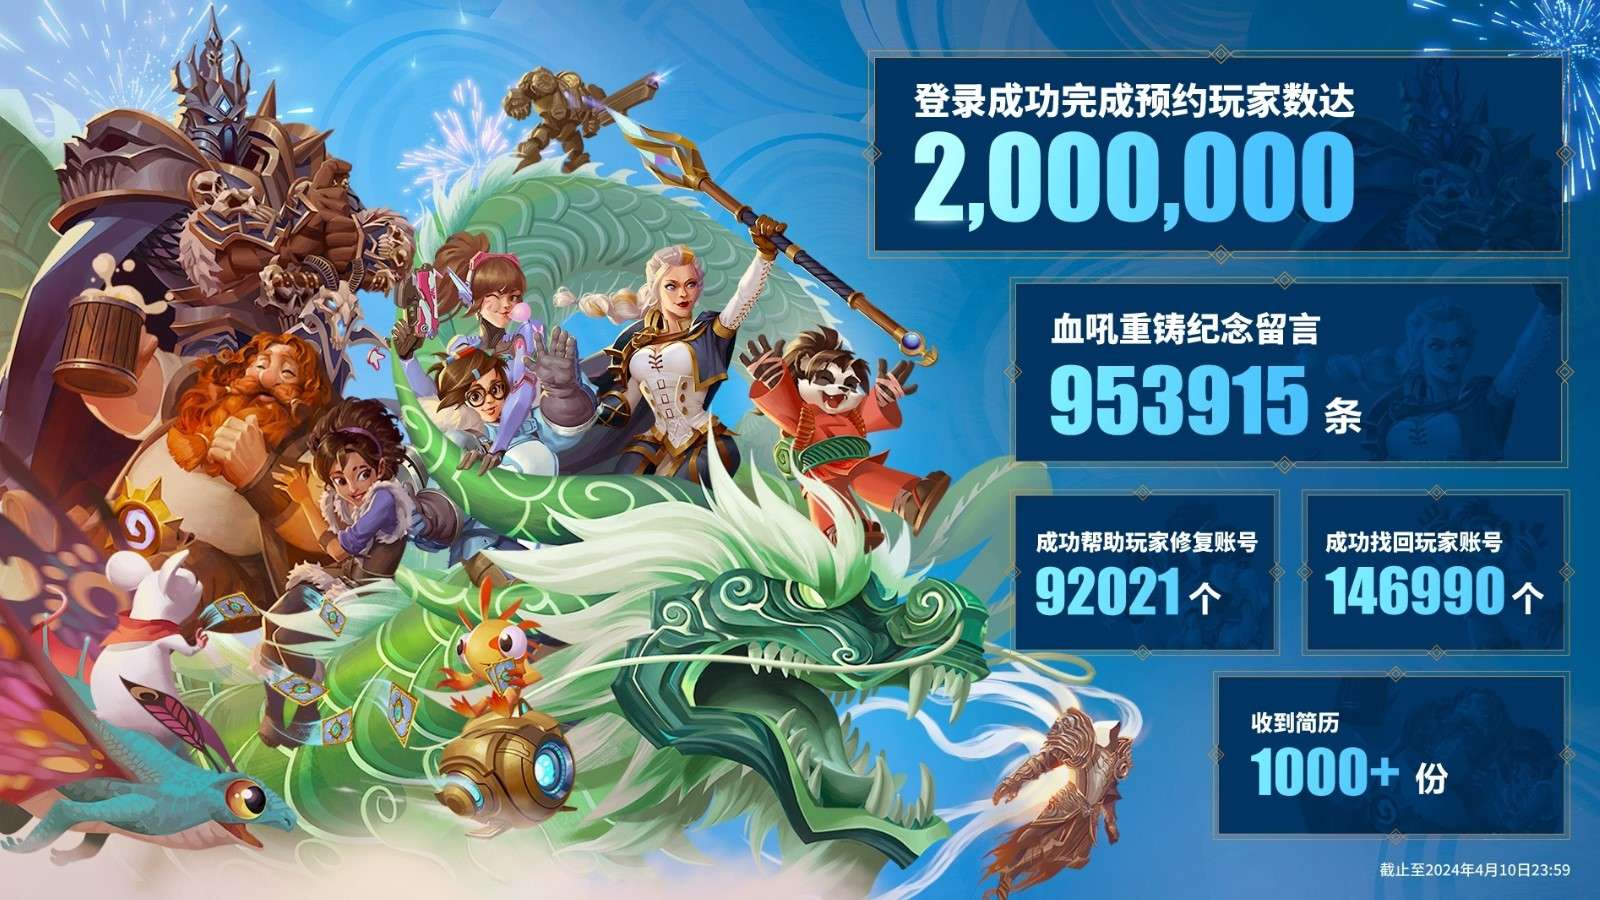 The breakdown of signup numbers for WoW from Blizzard China